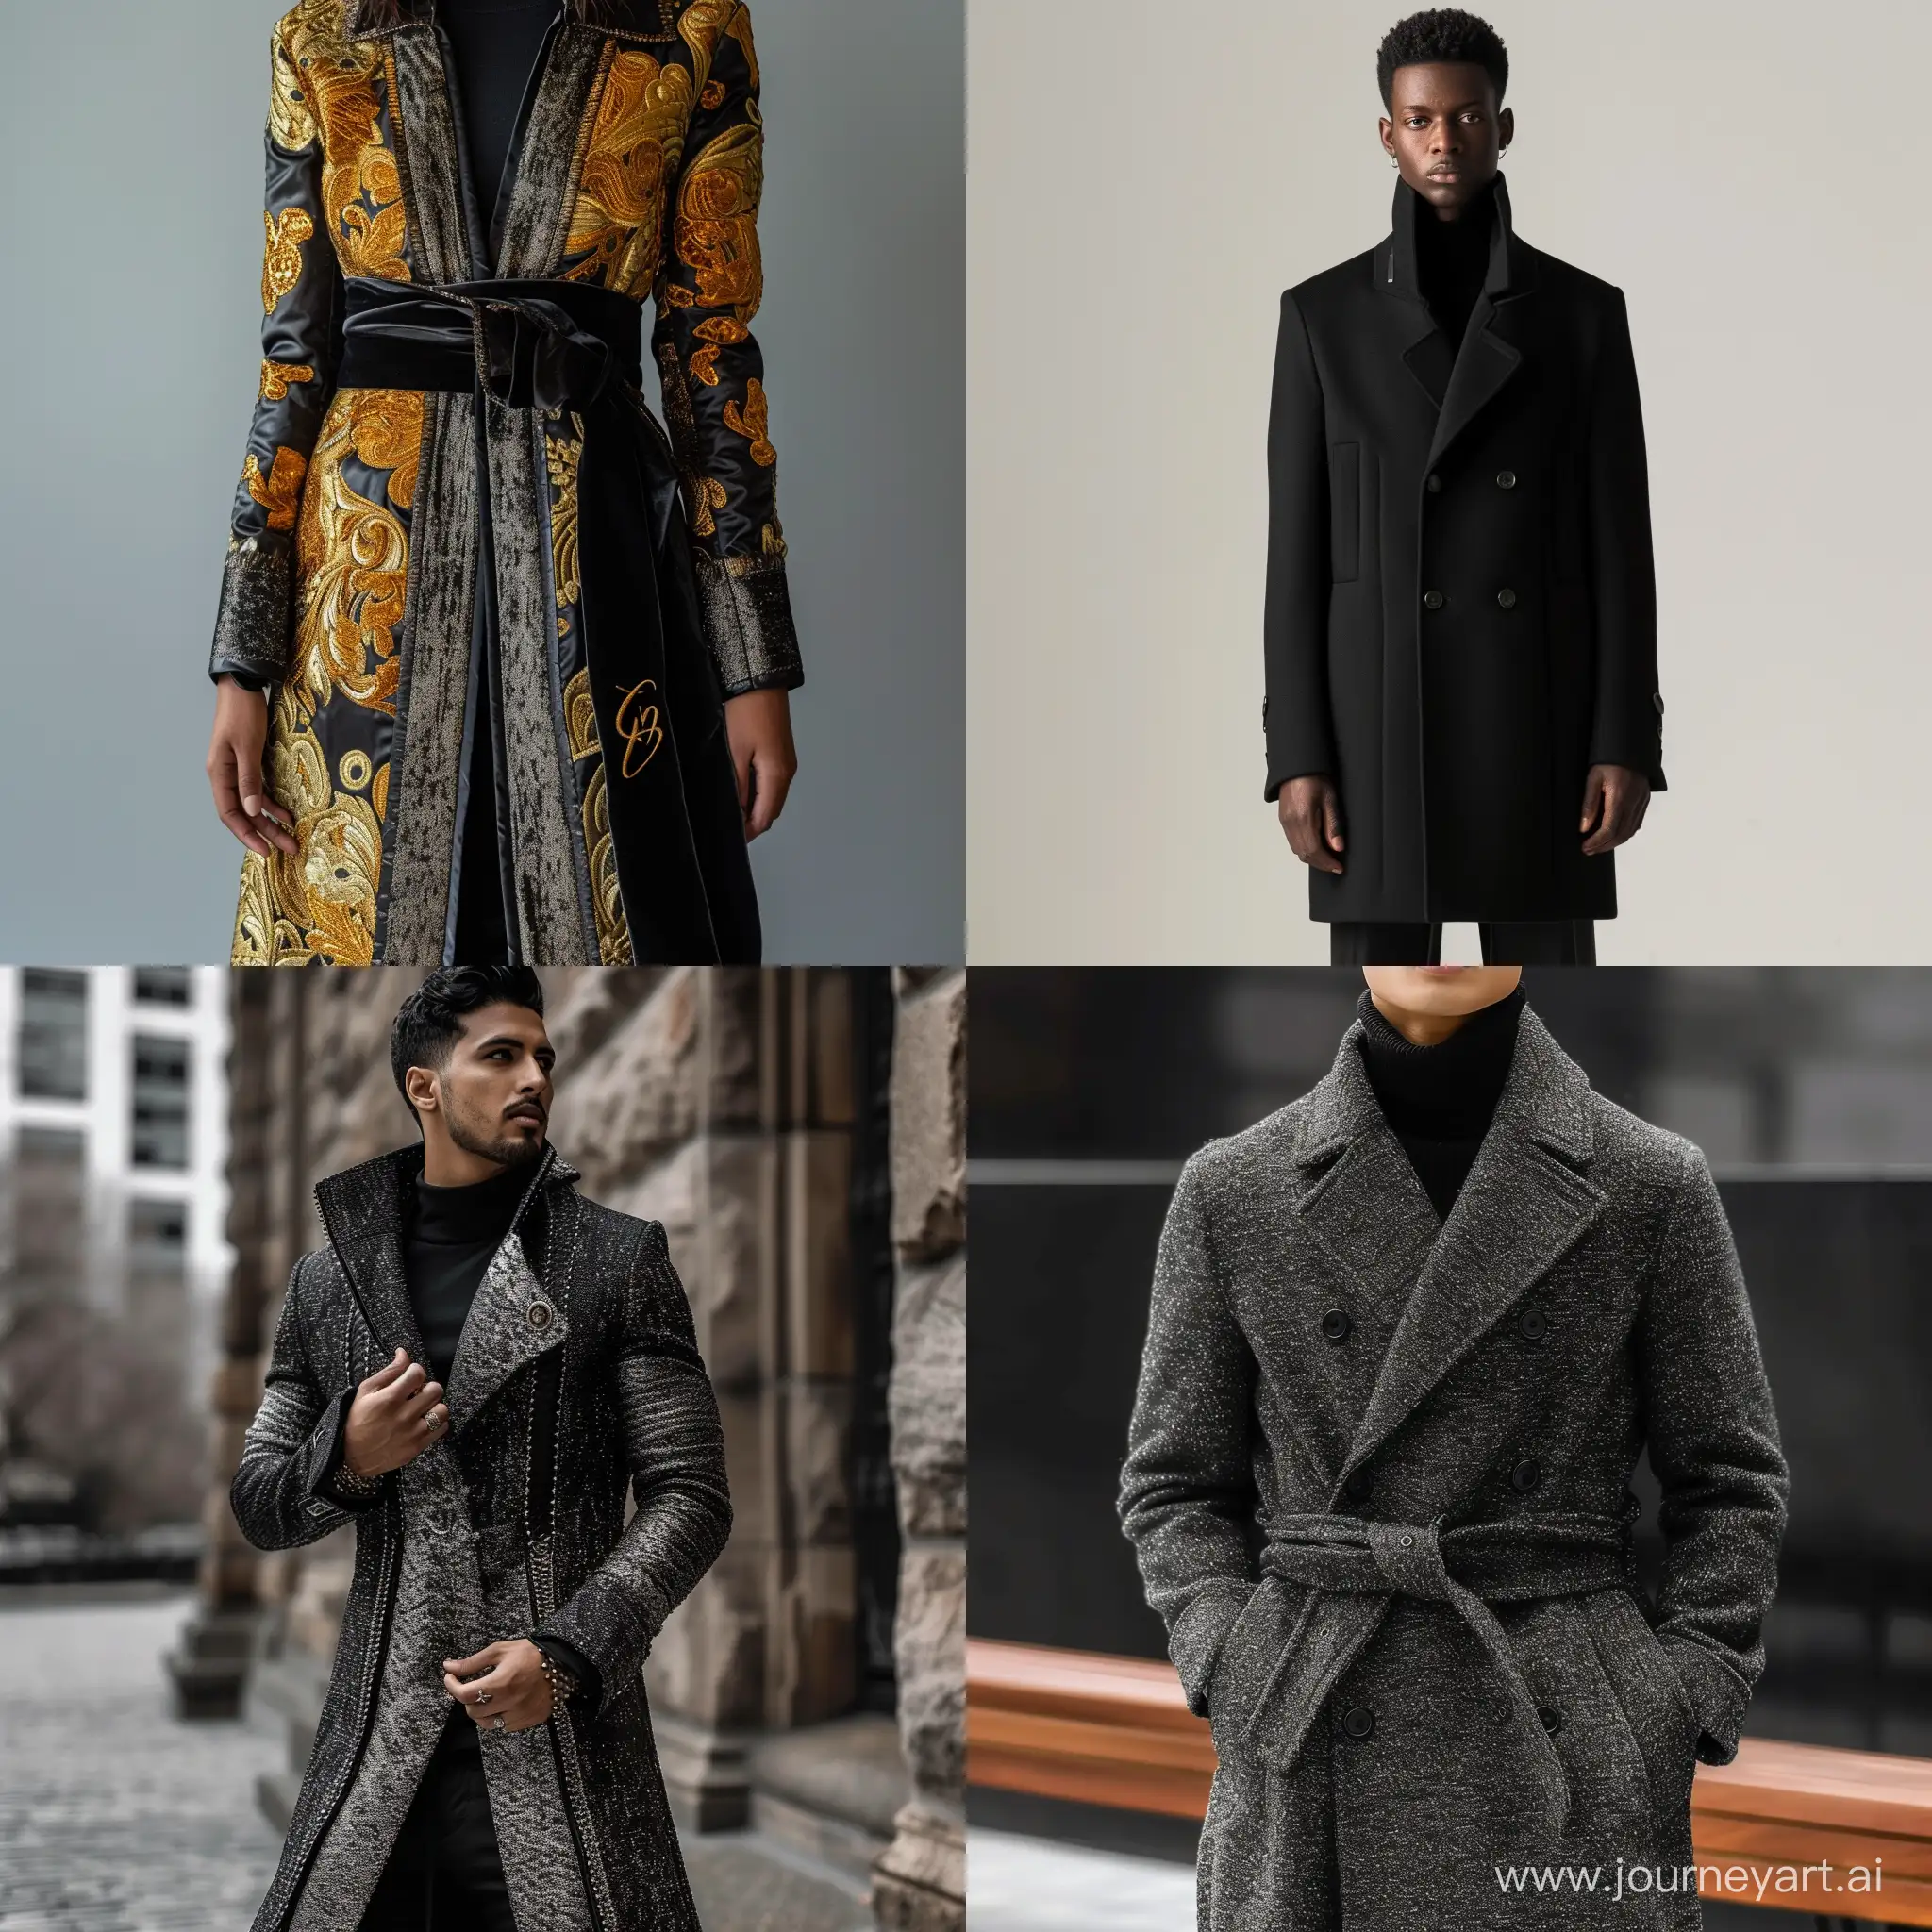 Make an luxurious coat with a modern and new design with a visible brand with the name elysian coats